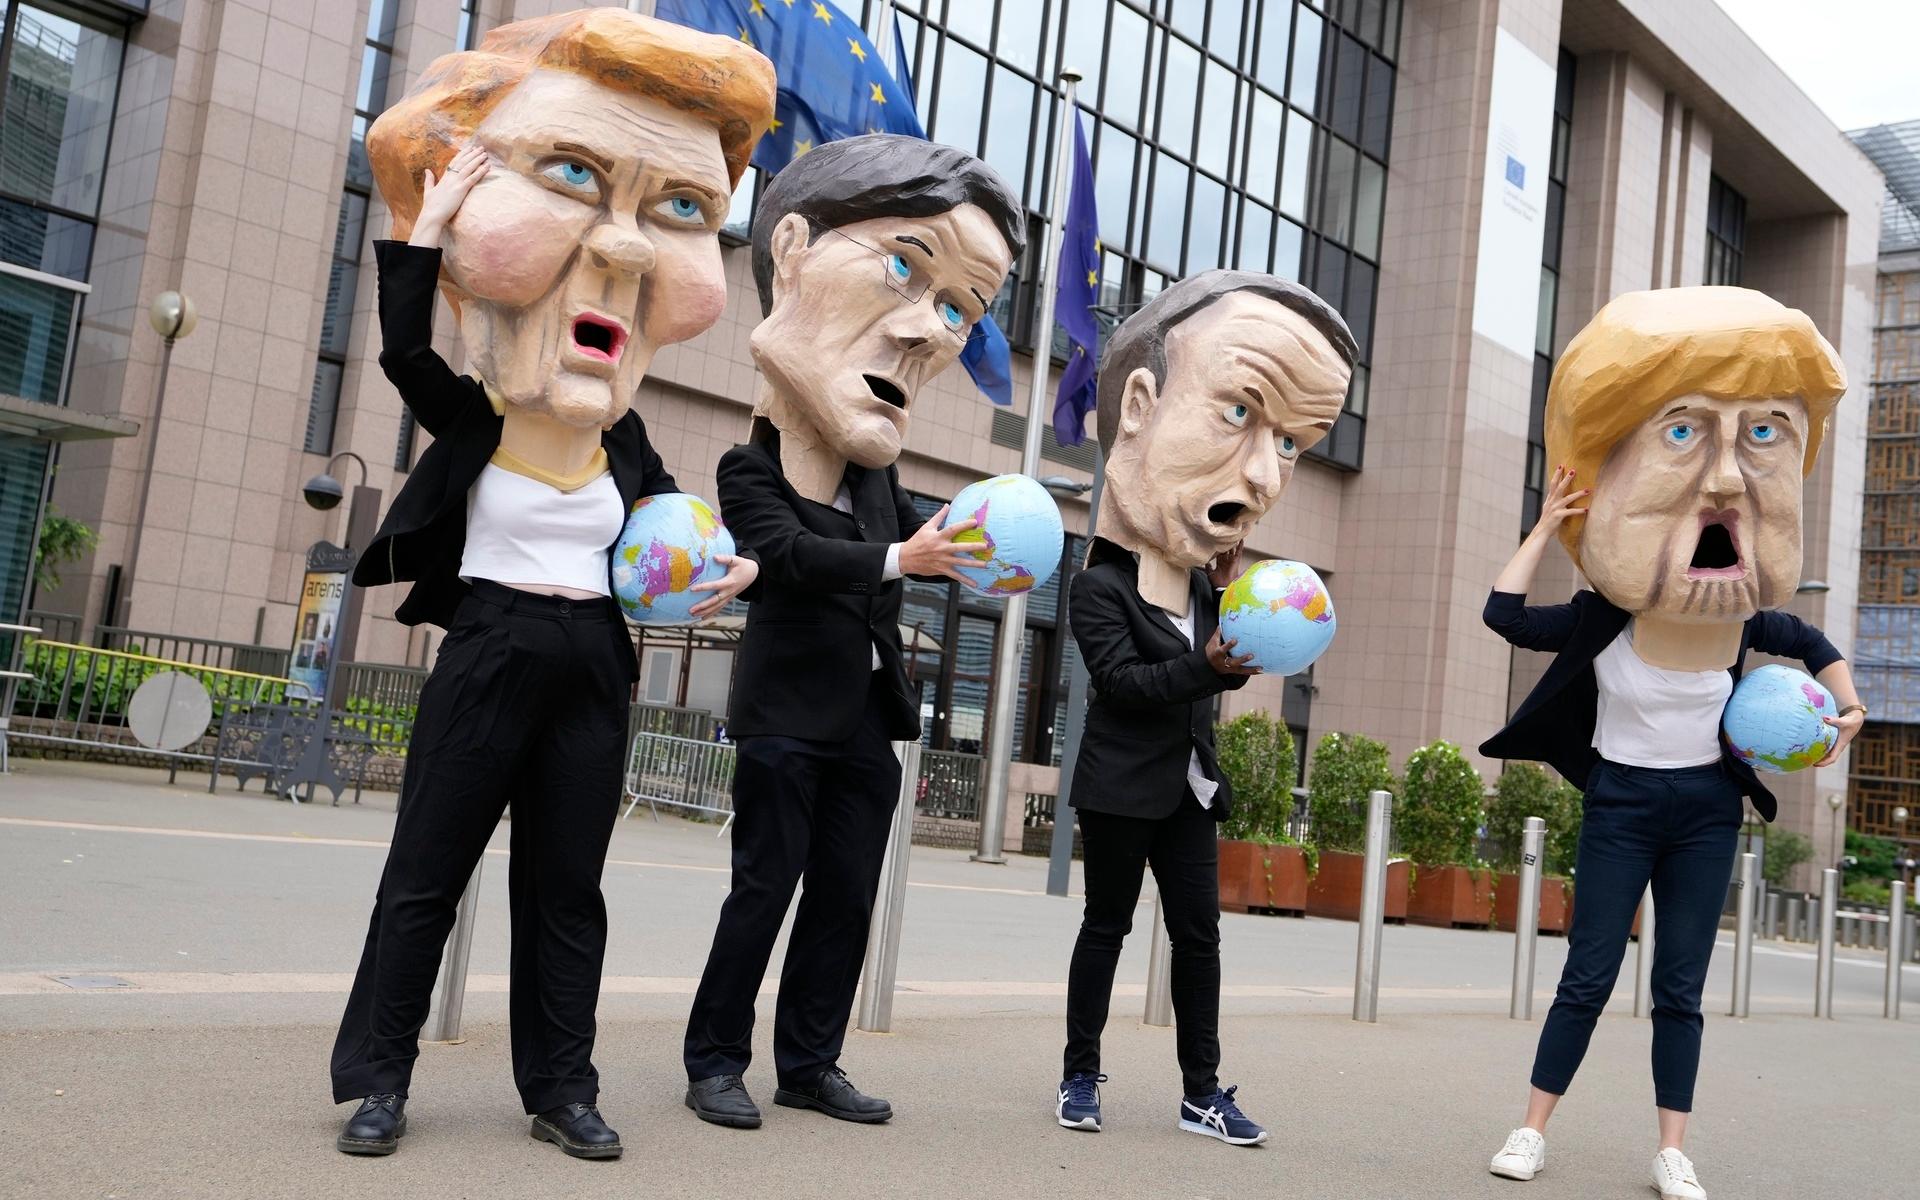 Climate activists wearing giant heads depicting EU leaders, from left to right, European Commission President Ursula von der Leyen, German Chancellor Angela Merkel, Dutch Prime Minister Mark Rutte and French President Emmanuel Macron hold globes as they demonstrate in front of the European Council building in Brussels, Tuesday, July 6, 2021. The demonstration was held to highlight the threat of the Energy Charter Treaty (ECT) to climate action. (AP Photo/Virginia Mayo)  VLM104